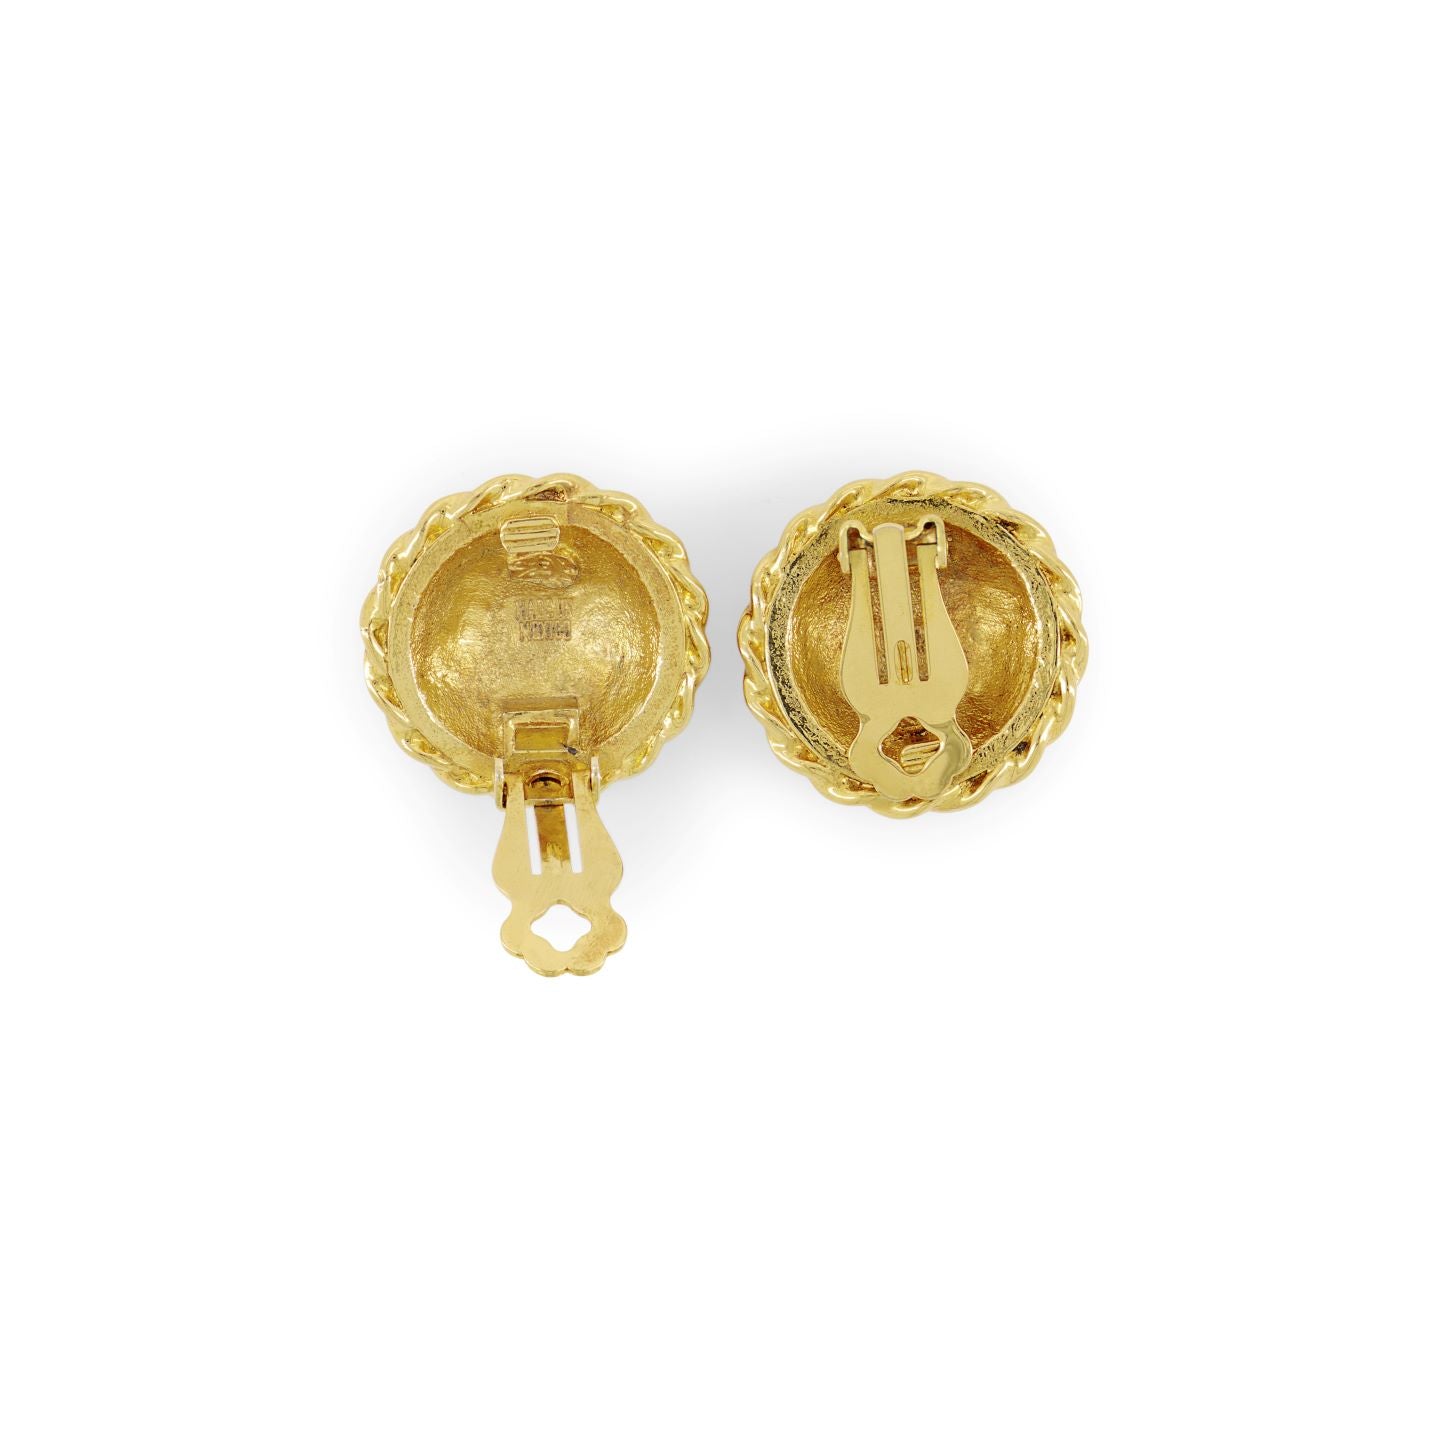 Vintage costume clip earrings in gold-plated metal back 